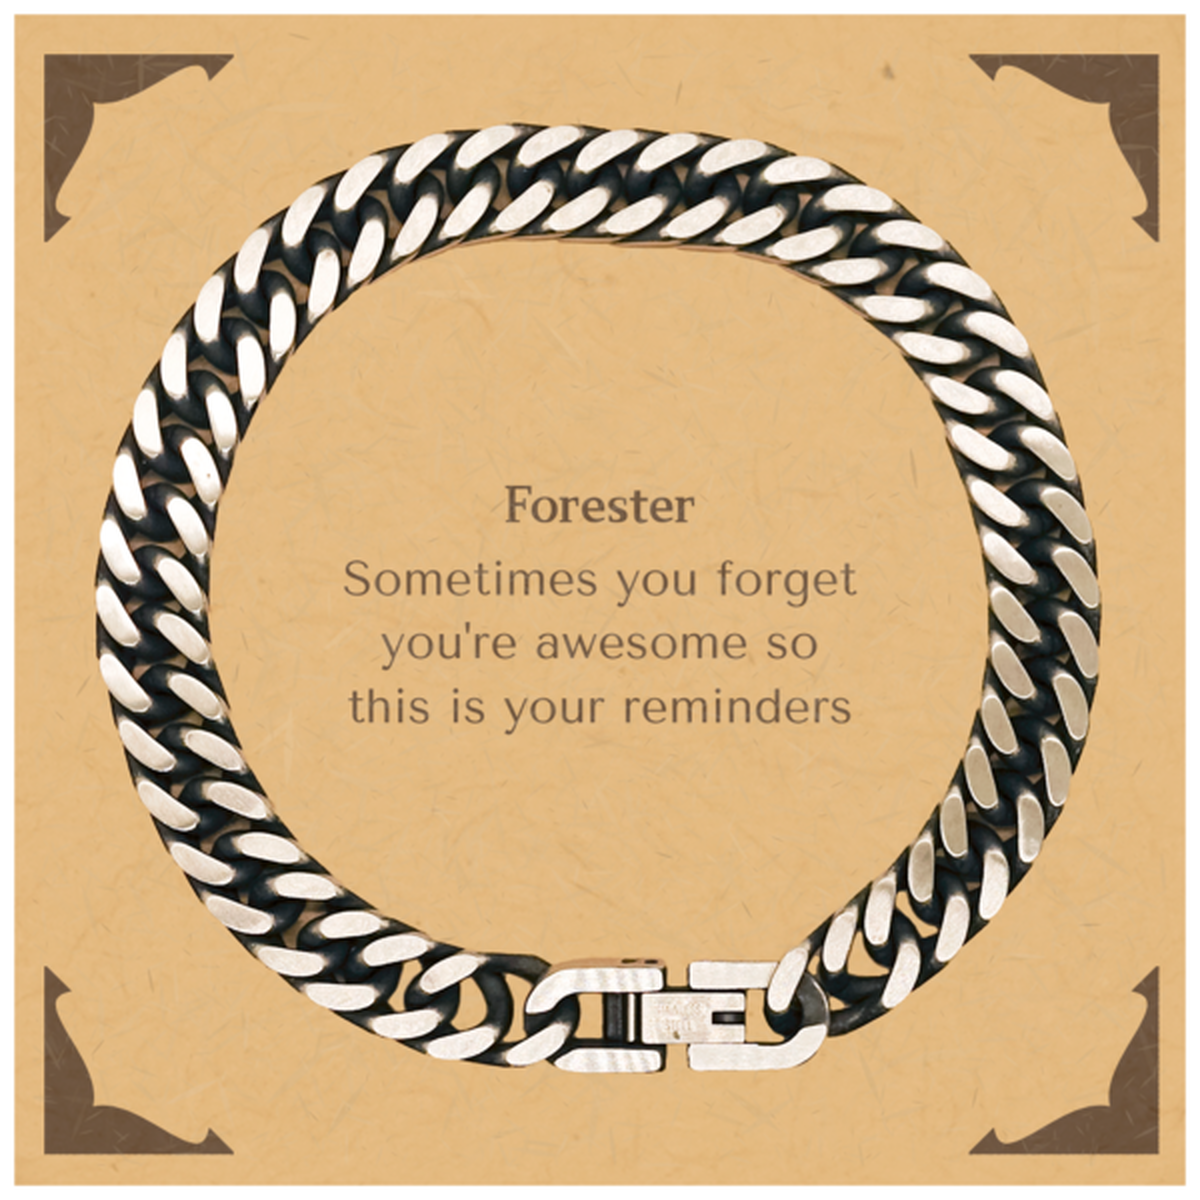 Sentimental Forester Cuban Link Chain Bracelet, Forester Sometimes you forget you're awesome so this is your reminders, Graduation Christmas Birthday Gifts for Forester, Men, Women, Coworkers